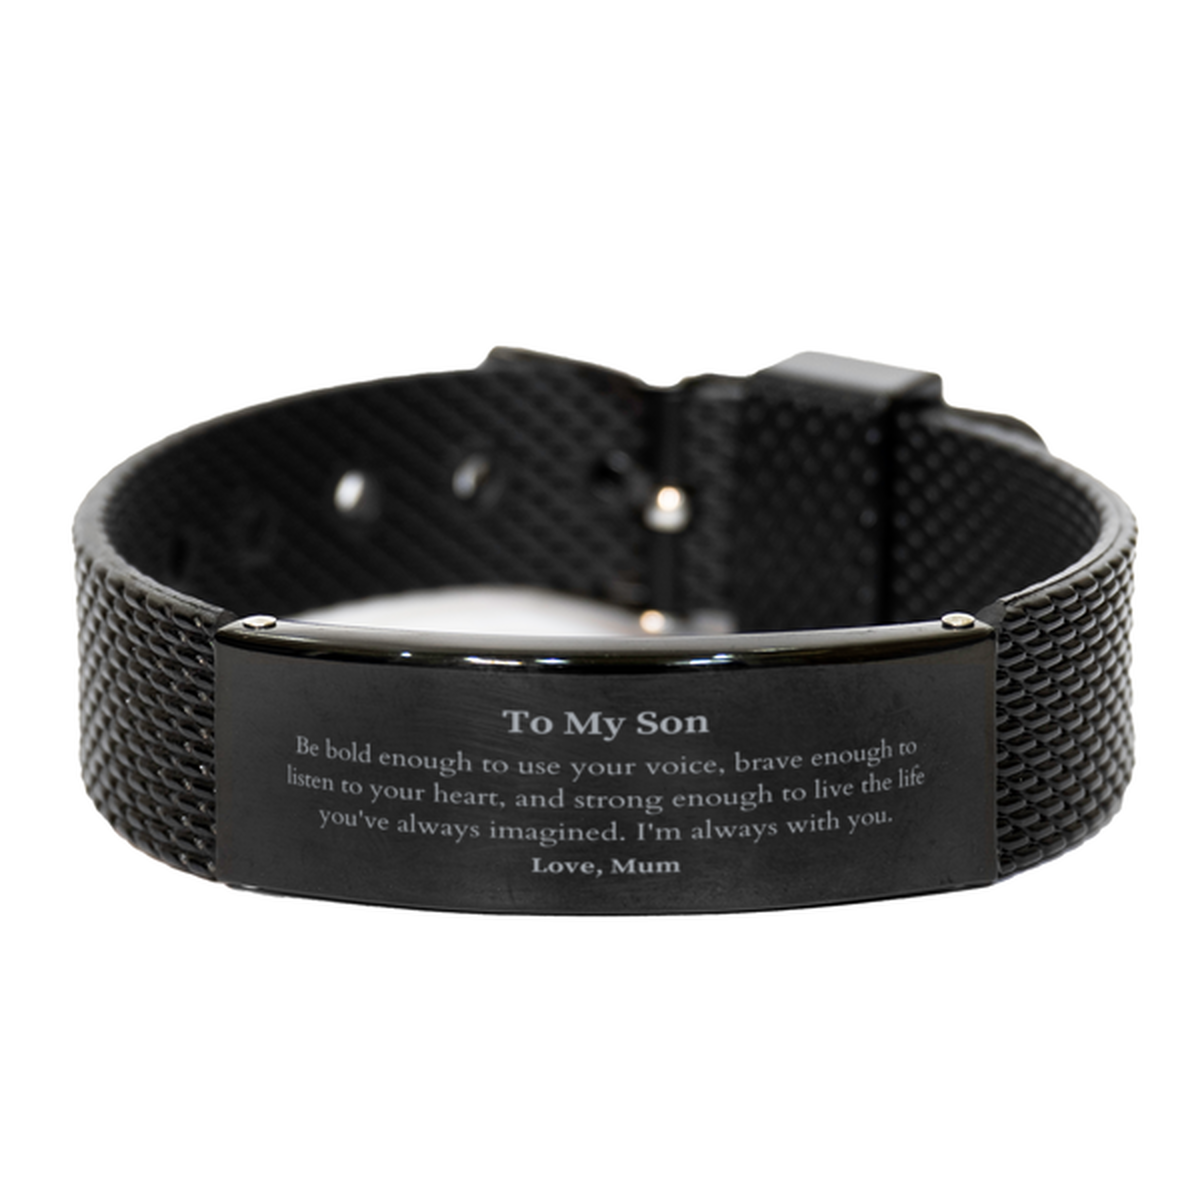 Keepsake Son Black Shark Mesh Bracelet Gift Idea Graduation Christmas Birthday Son from Mum, Son Be bold enough to use your voice, brave enough to listen to your heart. Love, Mum